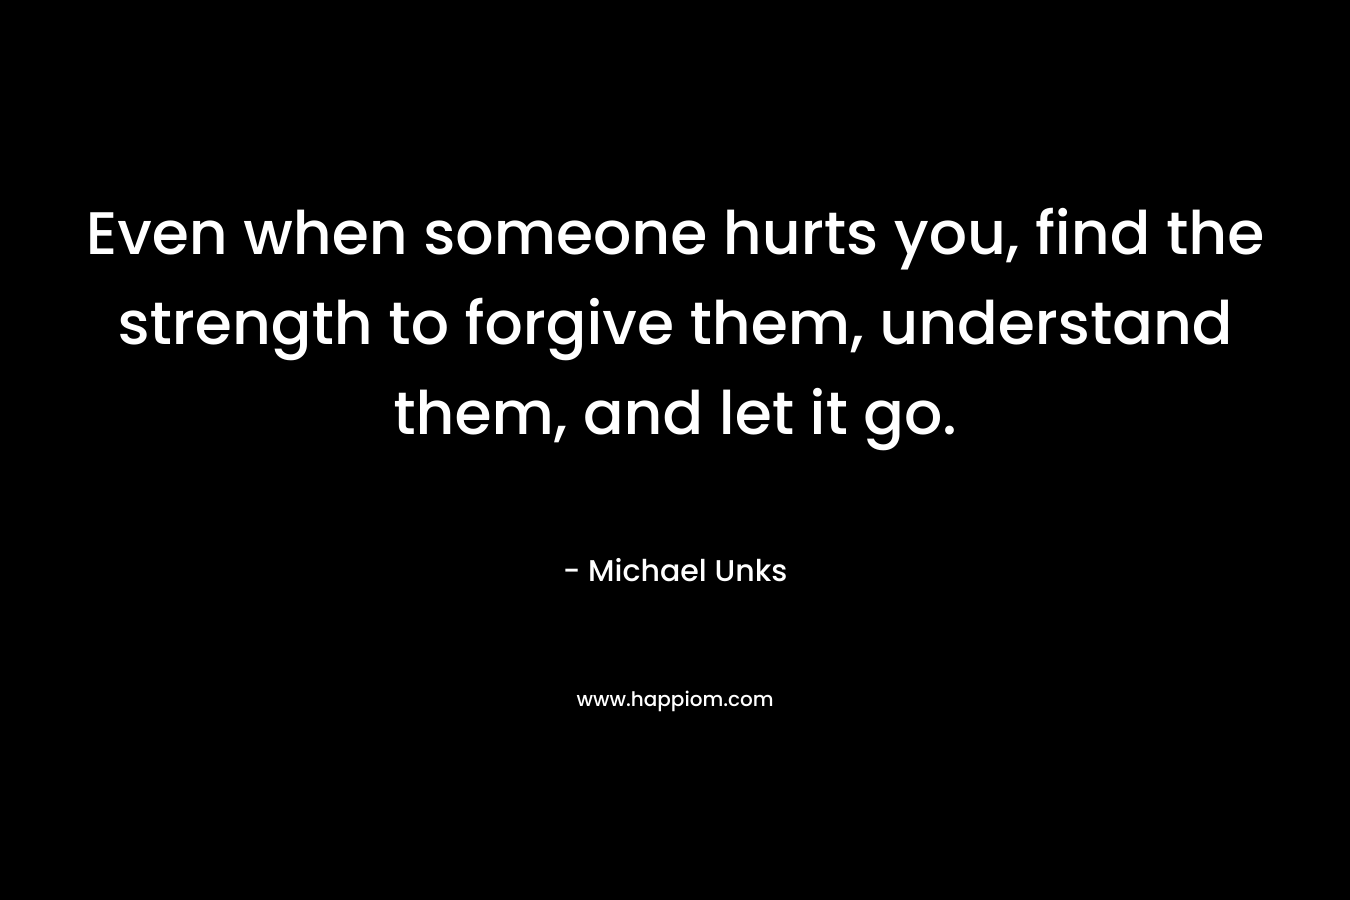 Even when someone hurts you, find the strength to forgive them, understand them, and let it go.